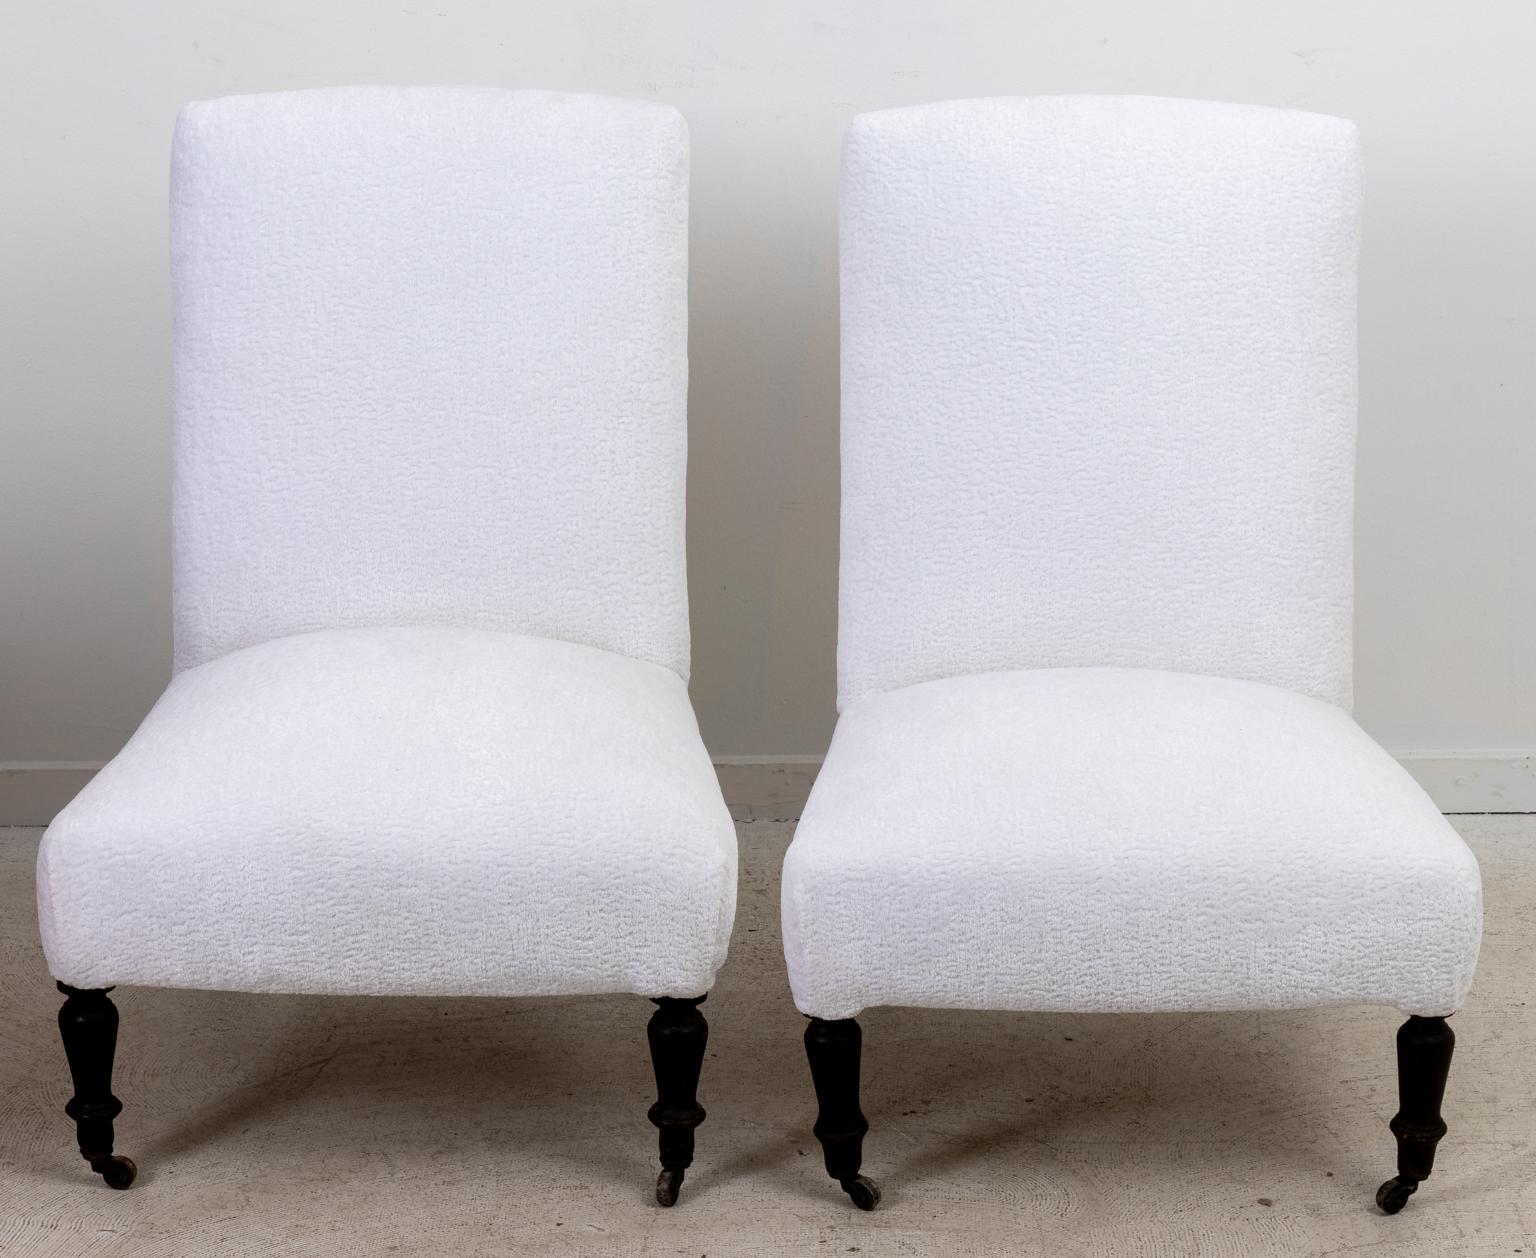 Circa 1880s pair of English Country House style chairs, freshly upholstered in fabric with ring turned legs on castors. Made in England. Please note of wear consistent with age.